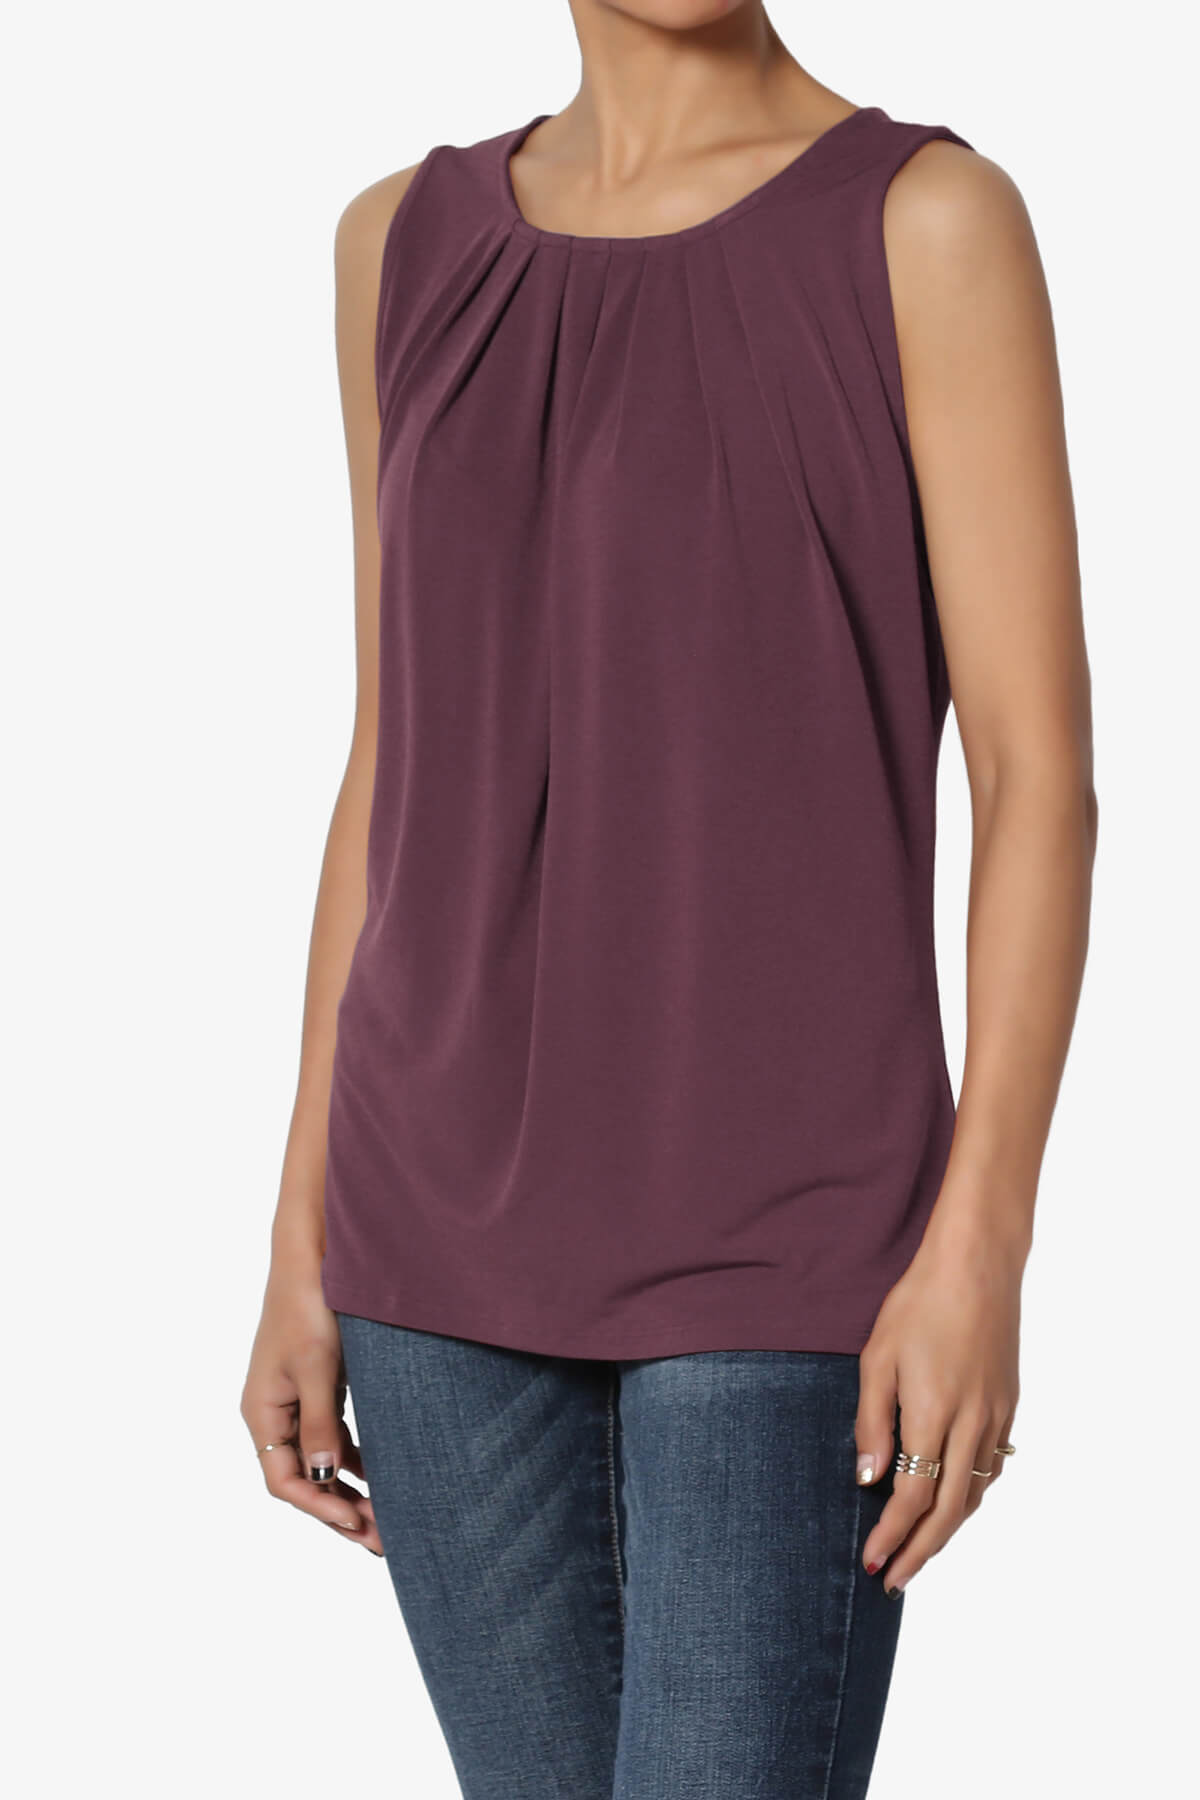 Load image into Gallery viewer, Chaffee Pleat Neck Tank Top DUSTY PLUM_3
